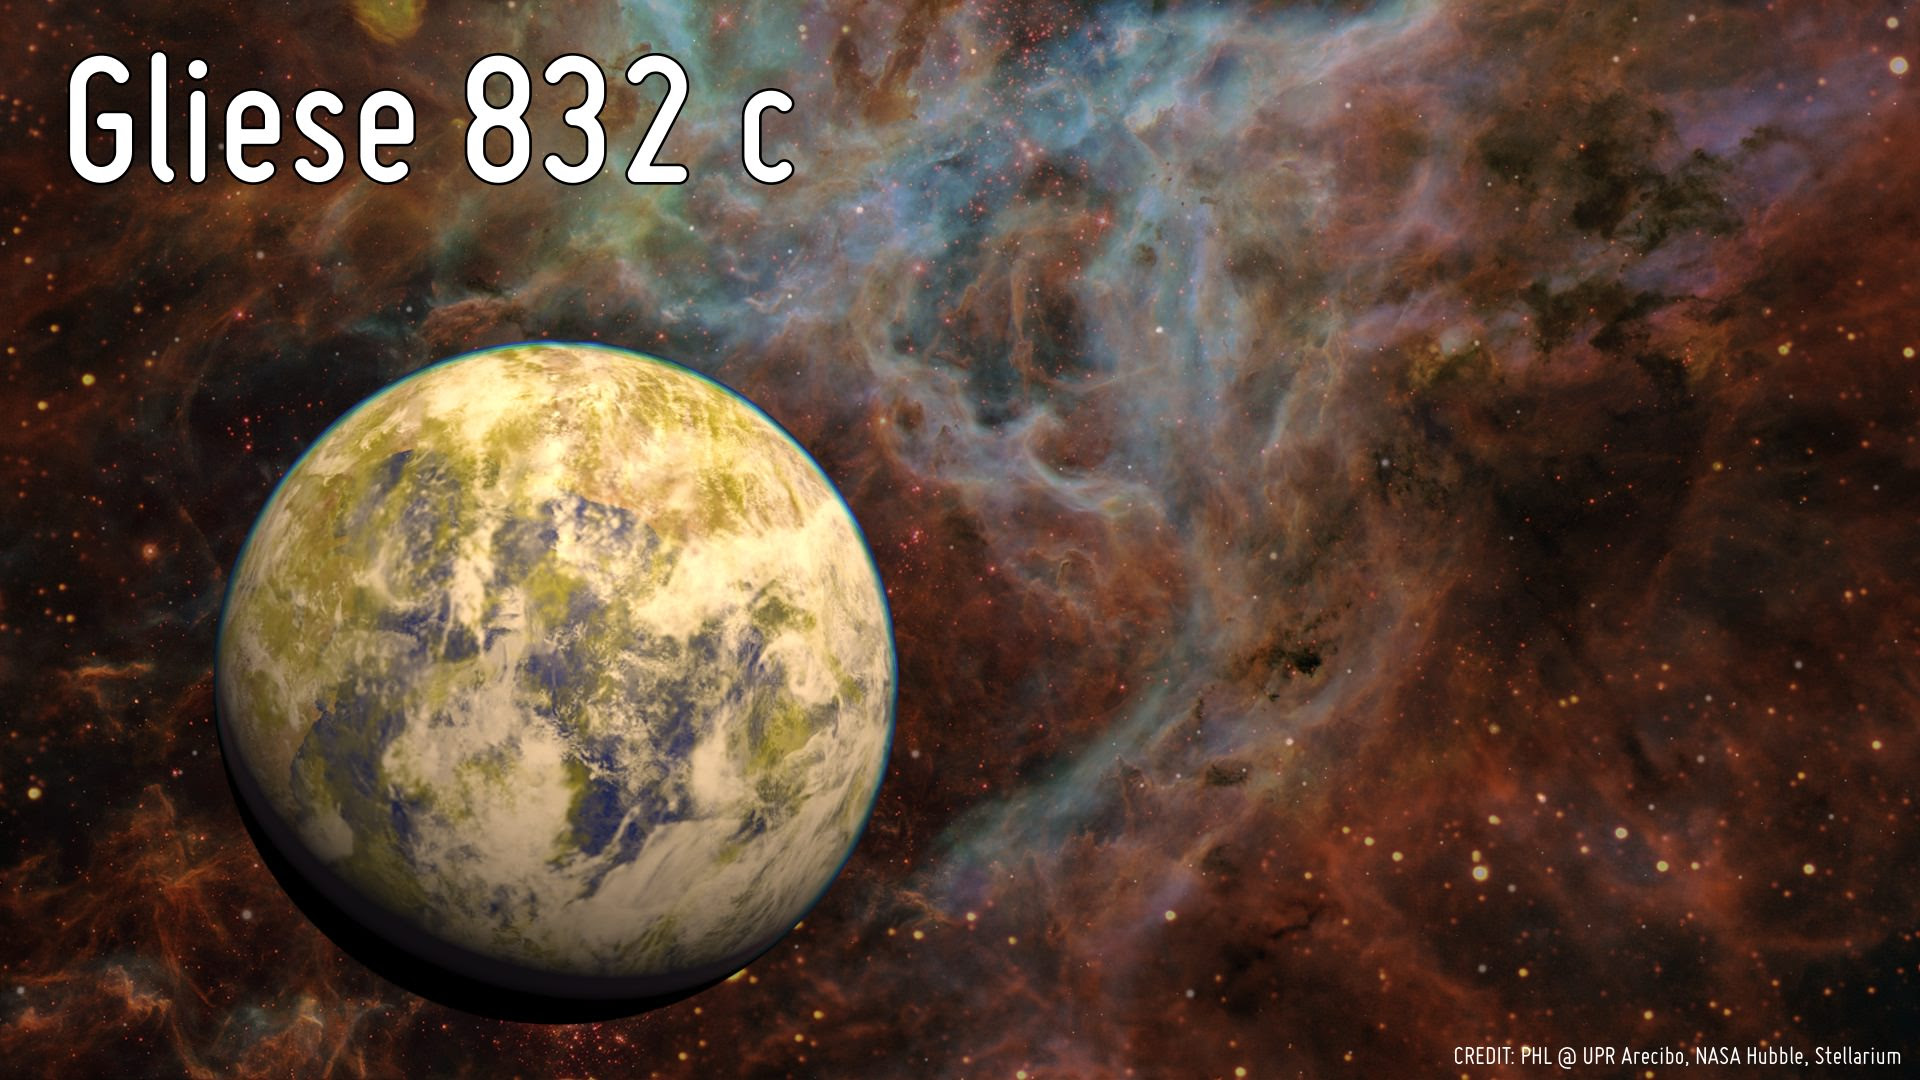 An Earth-like Planet Only 16 Light Years Away?